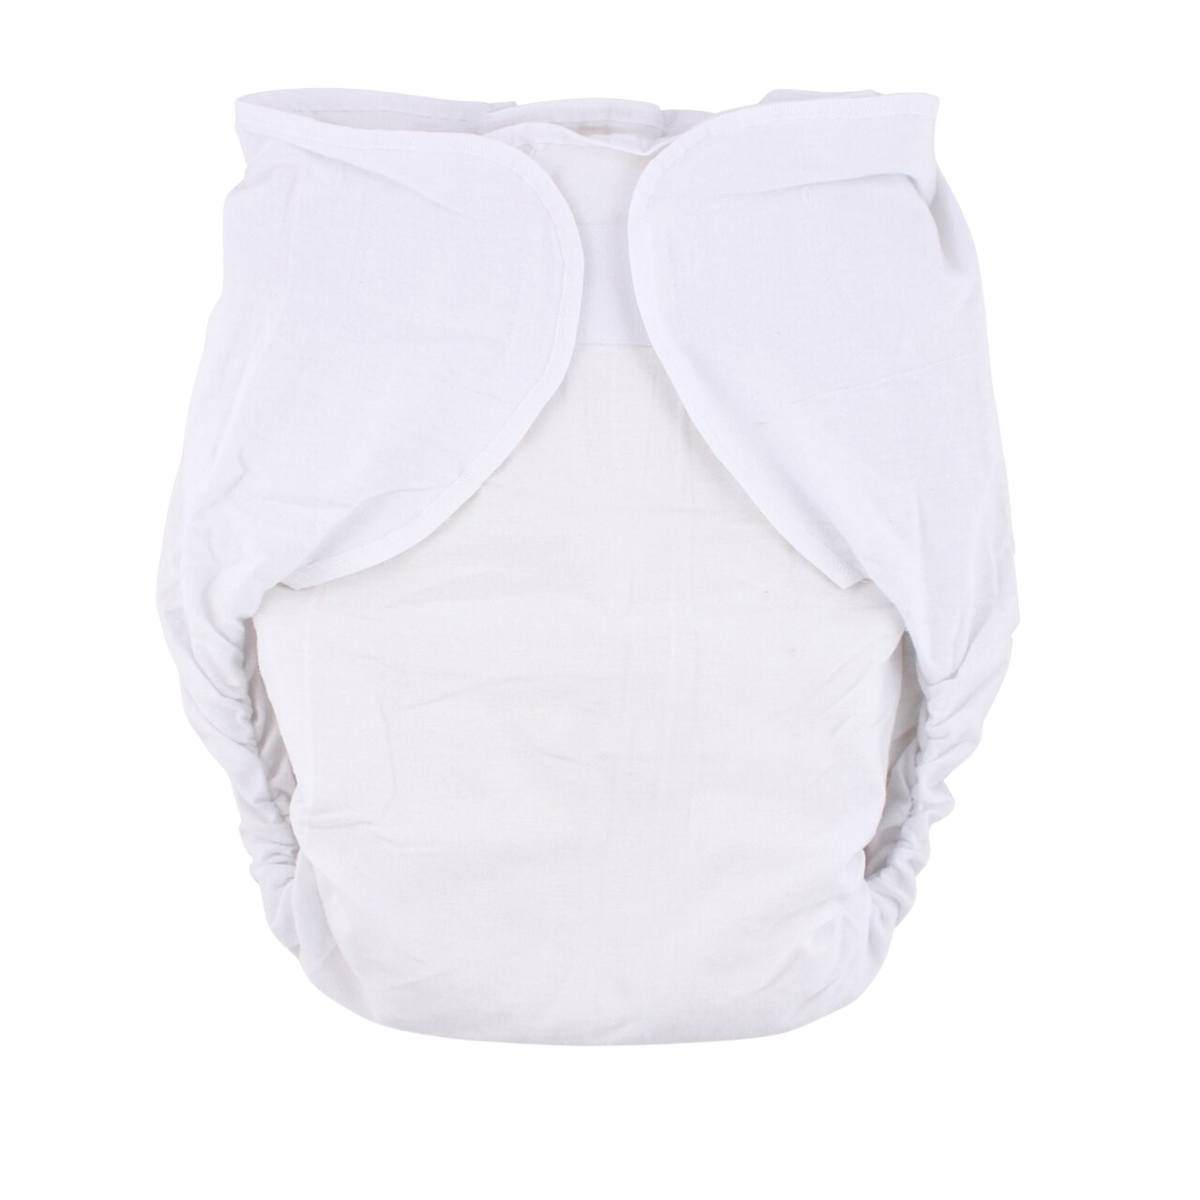 Adult Cloth Diaper, Washable Incontinence Diaper Adjustable Diaper Pants  Adult Diaper Reusable Elderly Incontinence Nappy for Men or Women(#2)